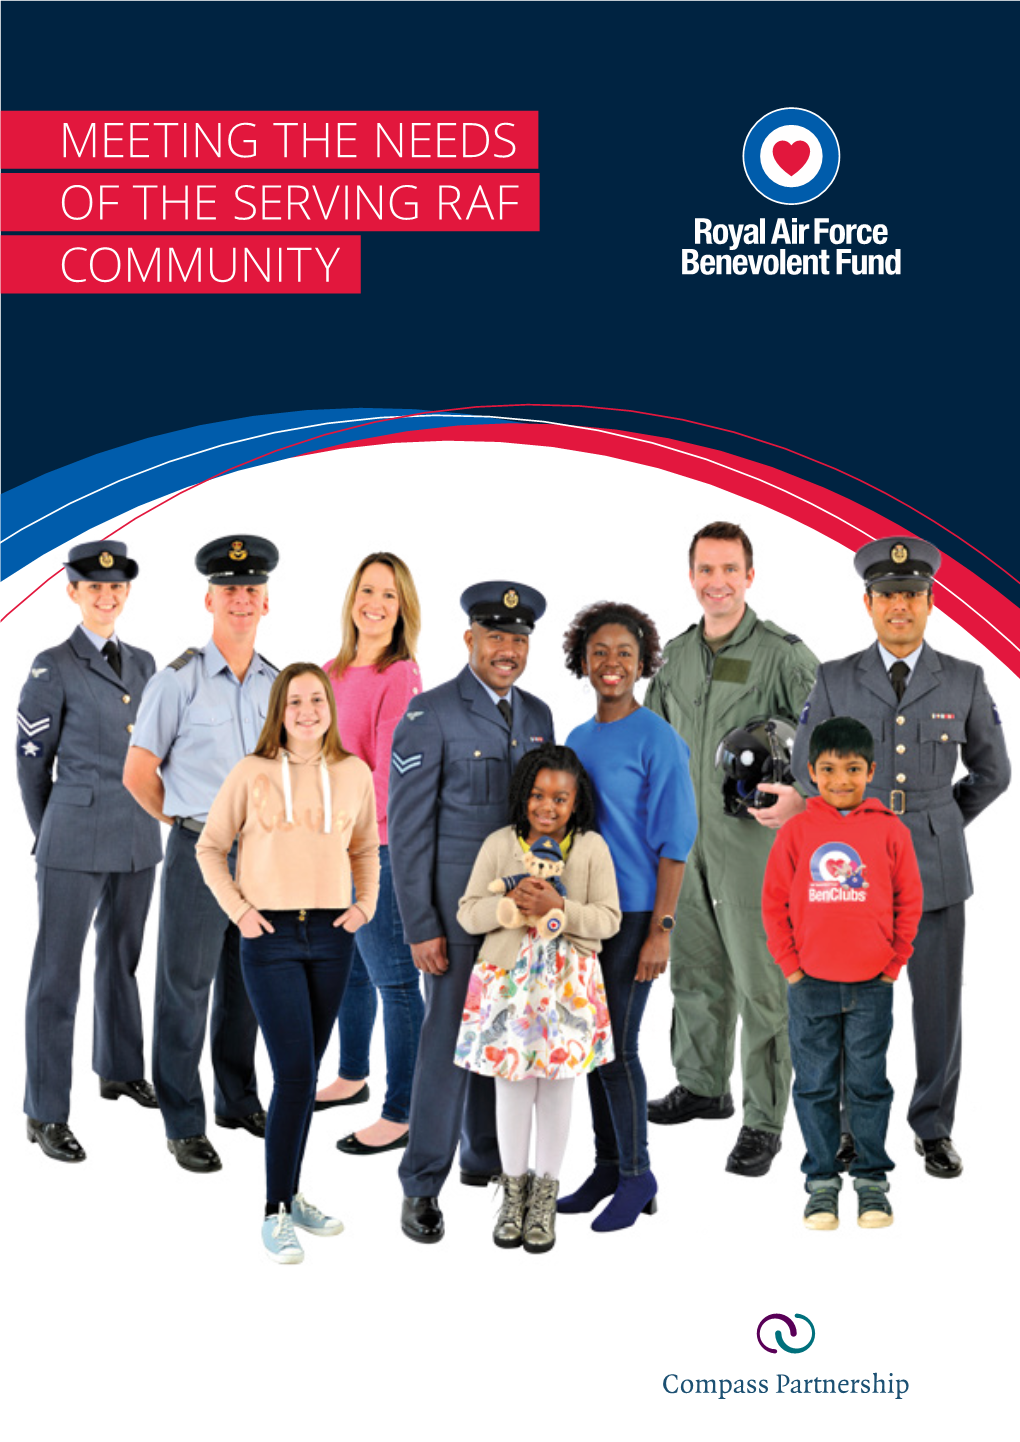 Meeting the Needs of the Serving RAF Community